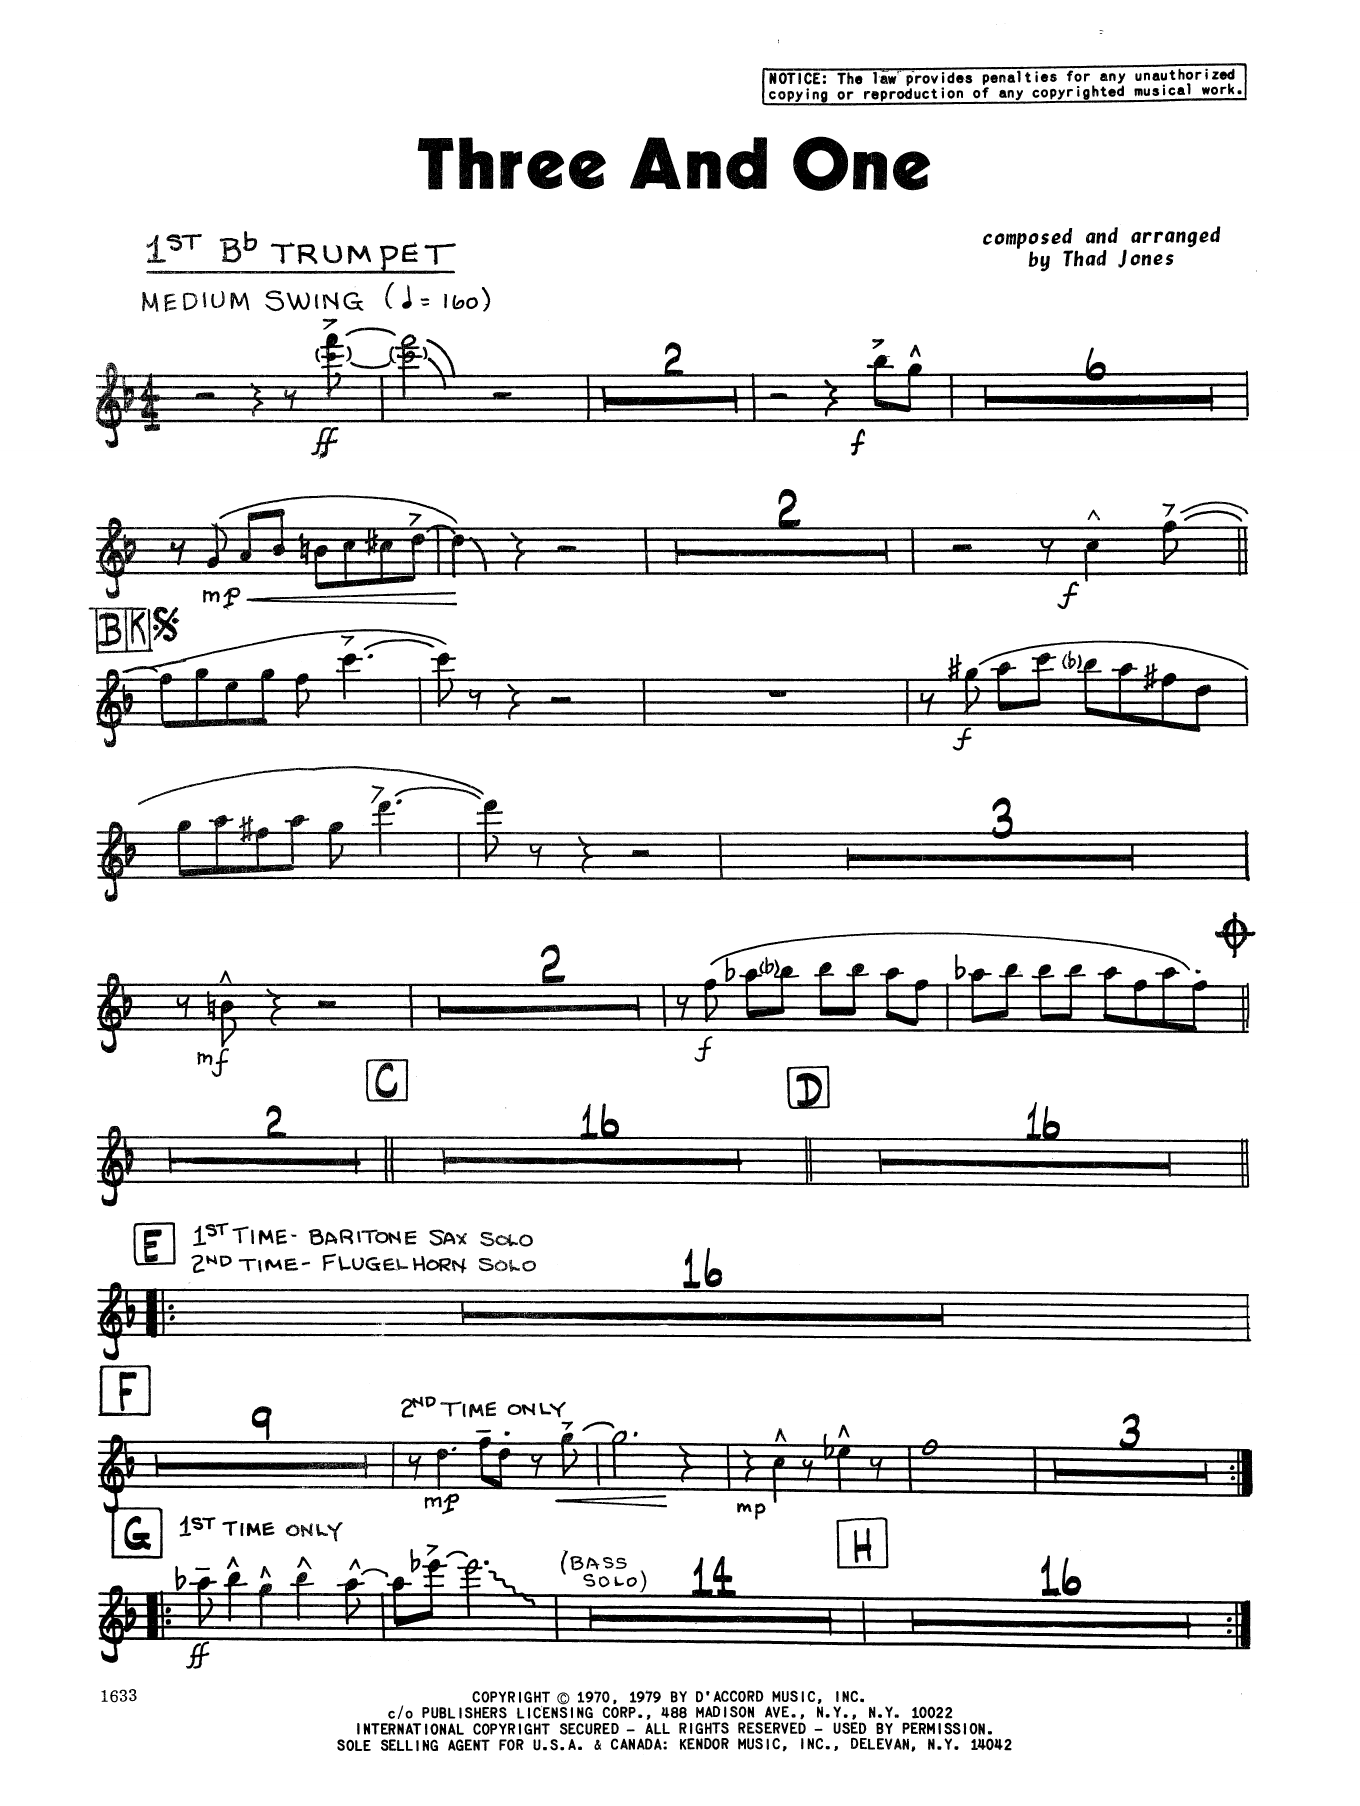 Download Thad Jones Three And One - 1st Bb Trumpet Sheet Music